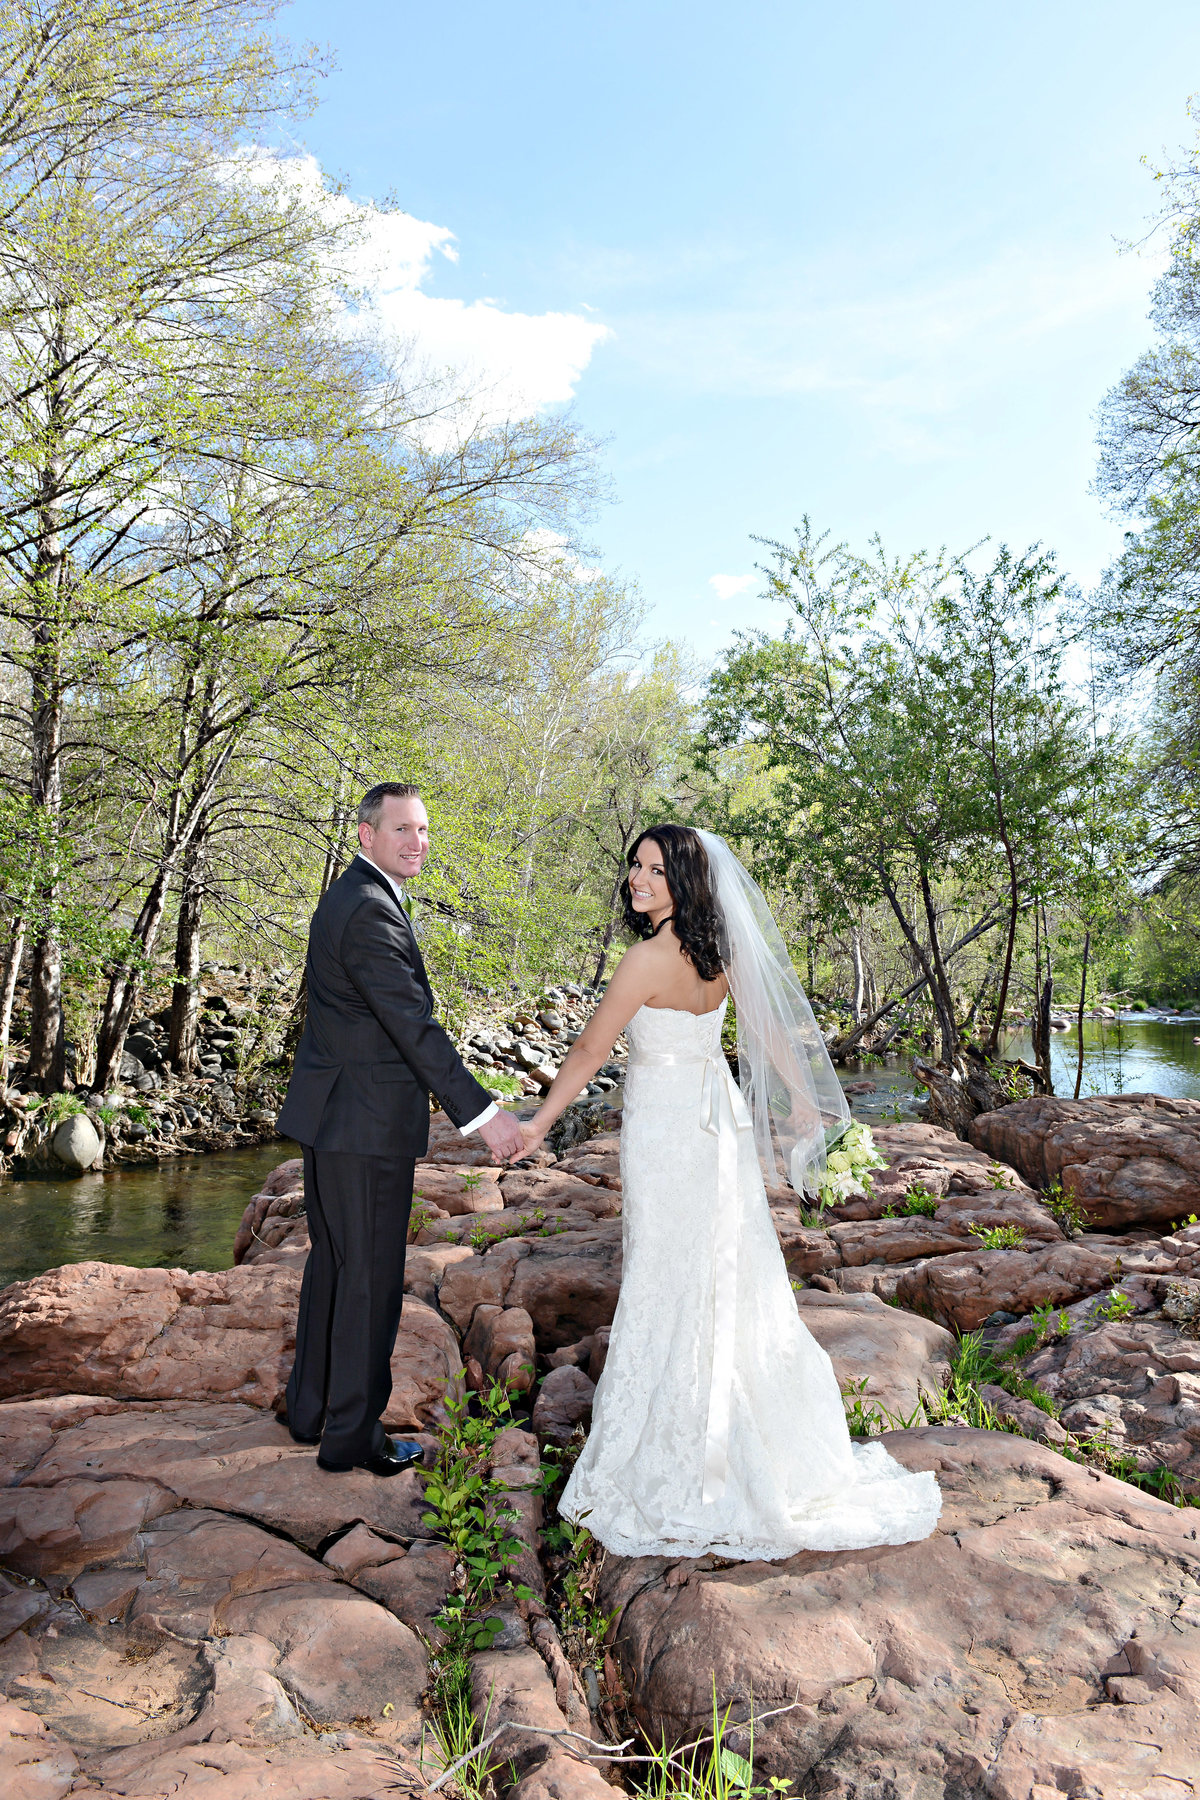 Bride and groom standing by a river in Sedona AZ